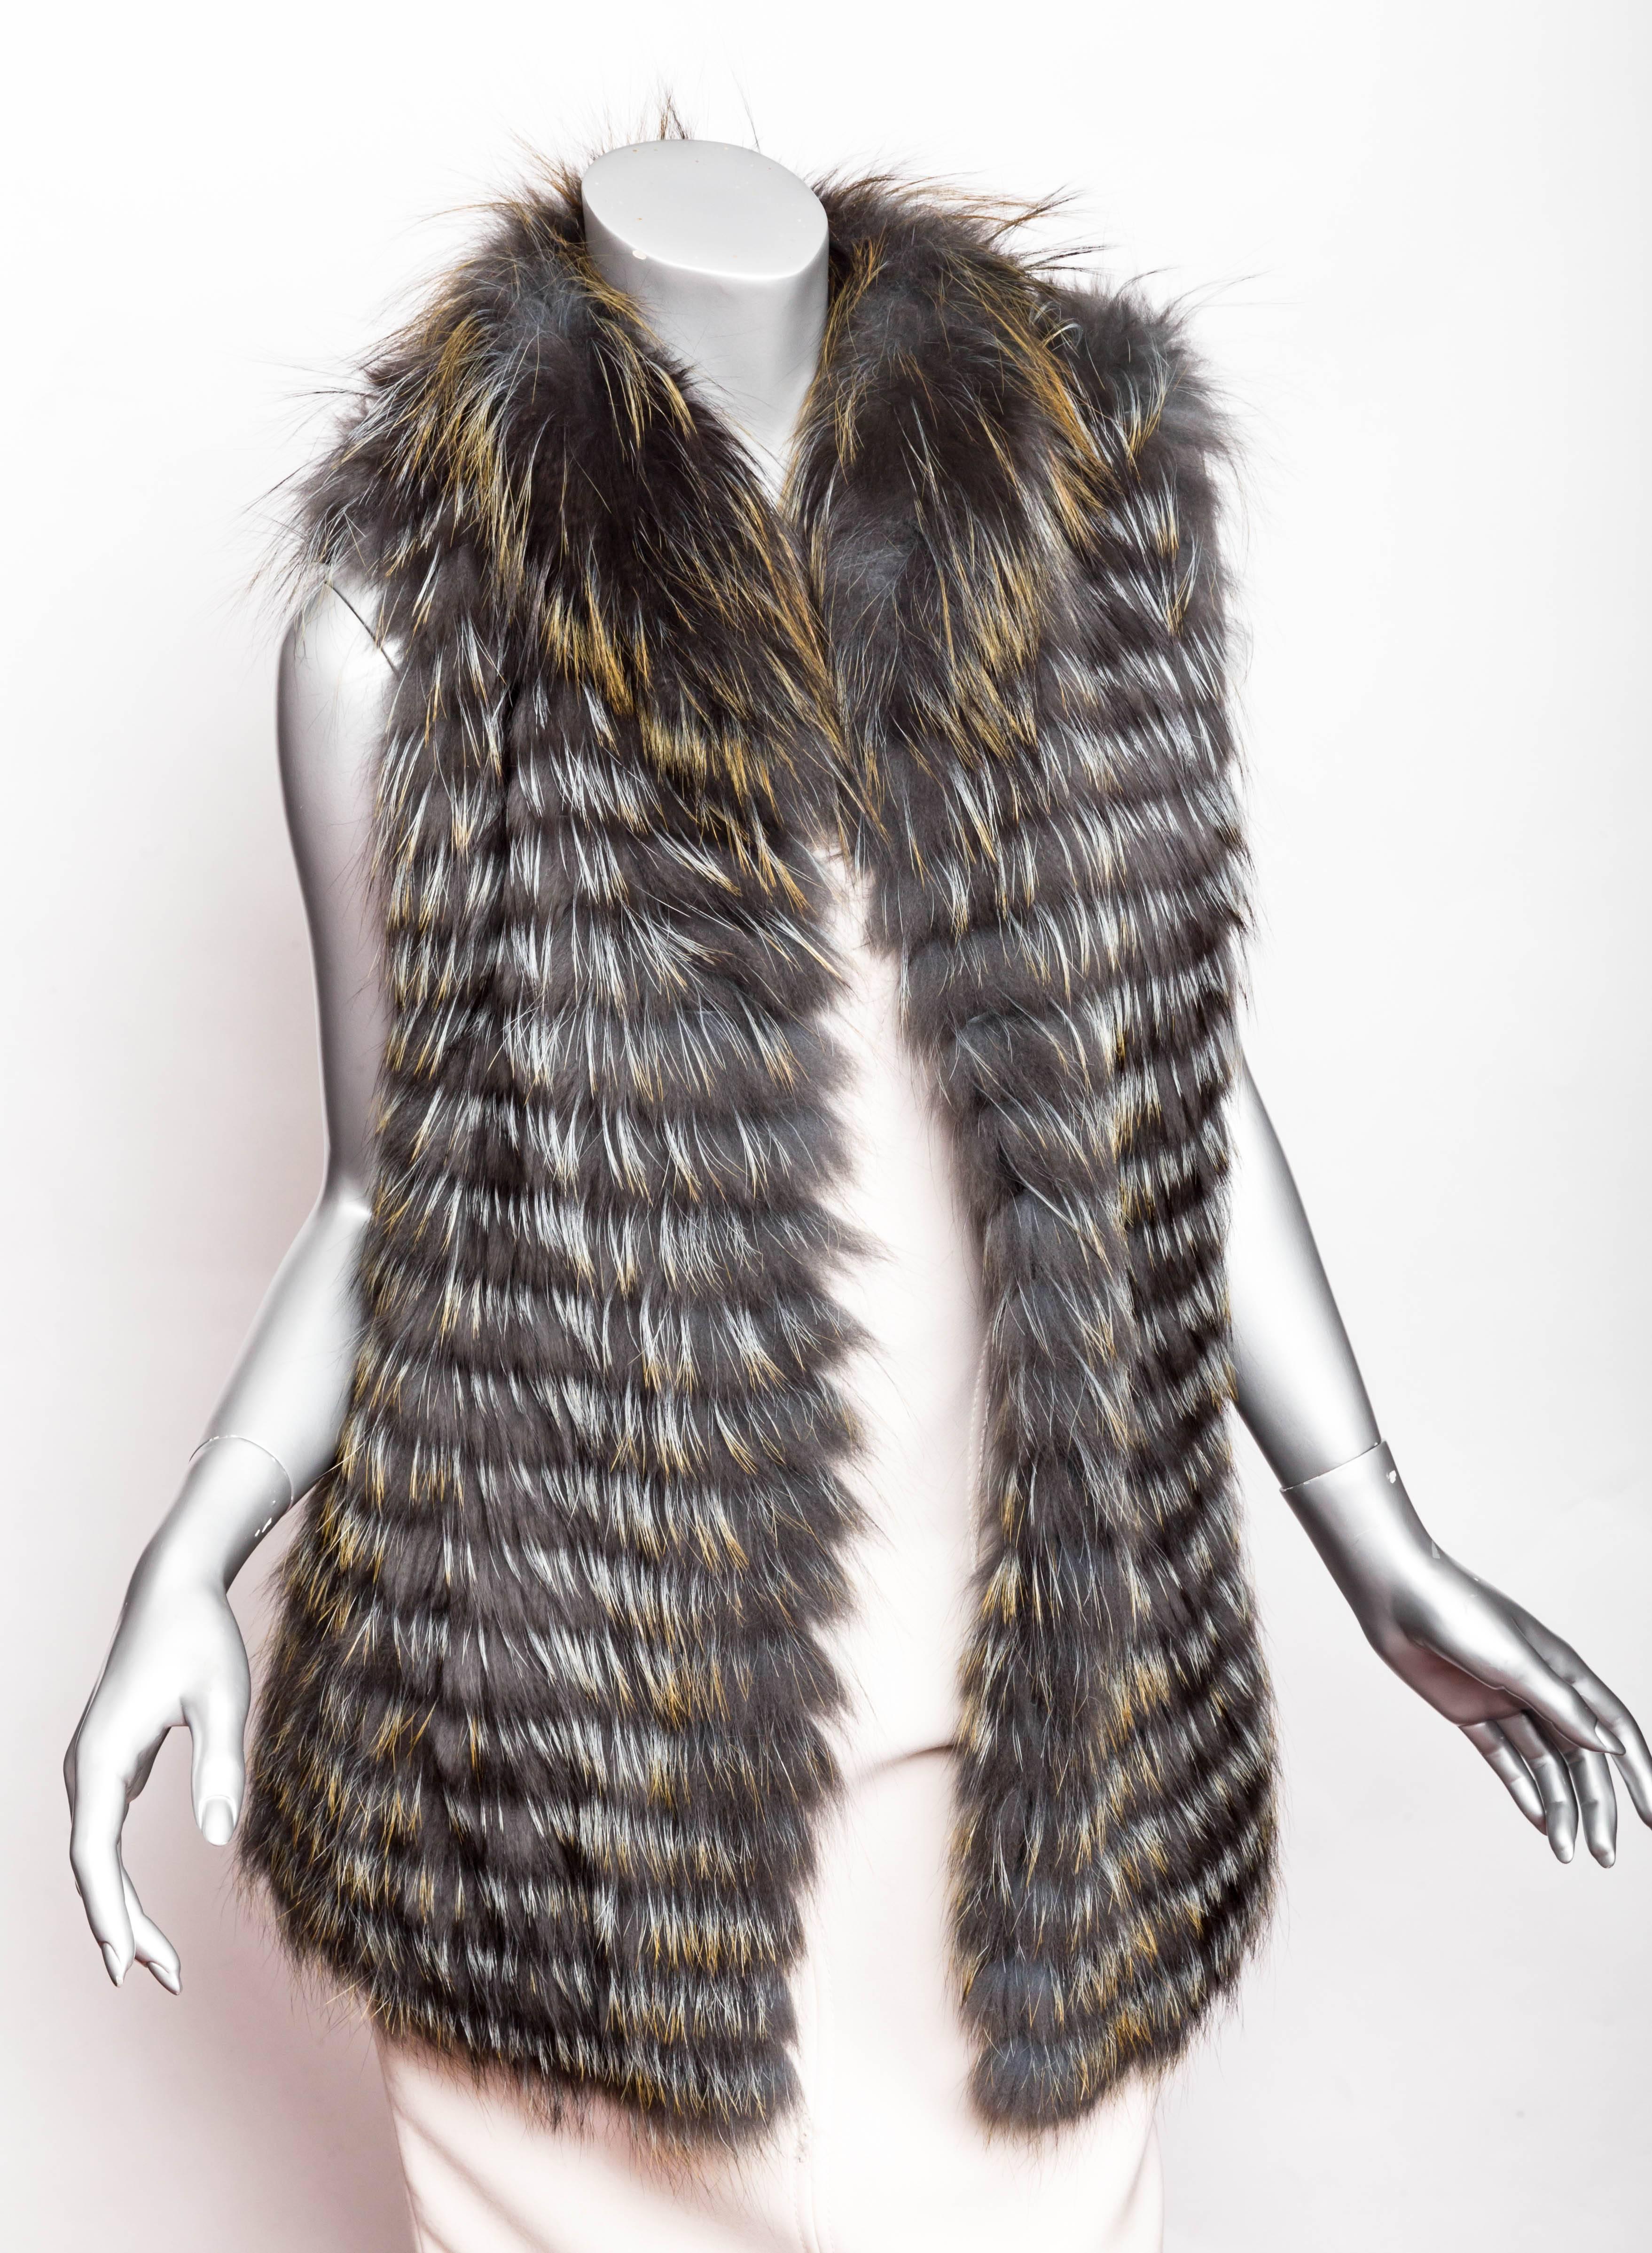 This Cassin Dyed Silver Fox Fur Vest is stunning. In shades of grey with hints of silver, this vest is your perfect layering piece. One invisible hook and eye cinches this vest at the waist. Great length and a very light wearable fur vest.